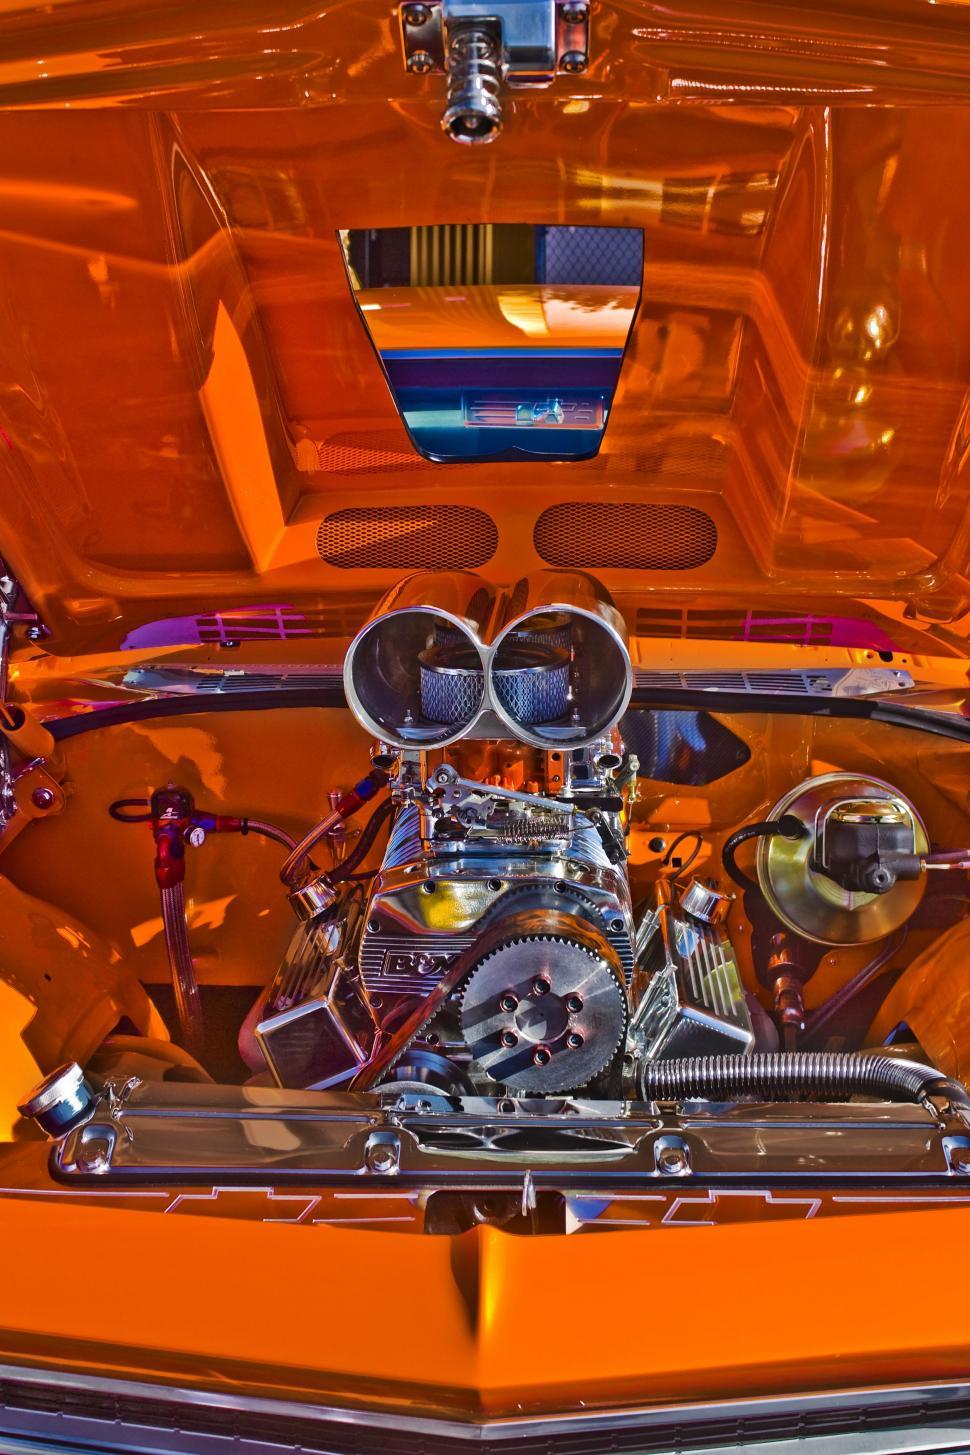 Free Image of Close Up of the Engine of an Orange Car 